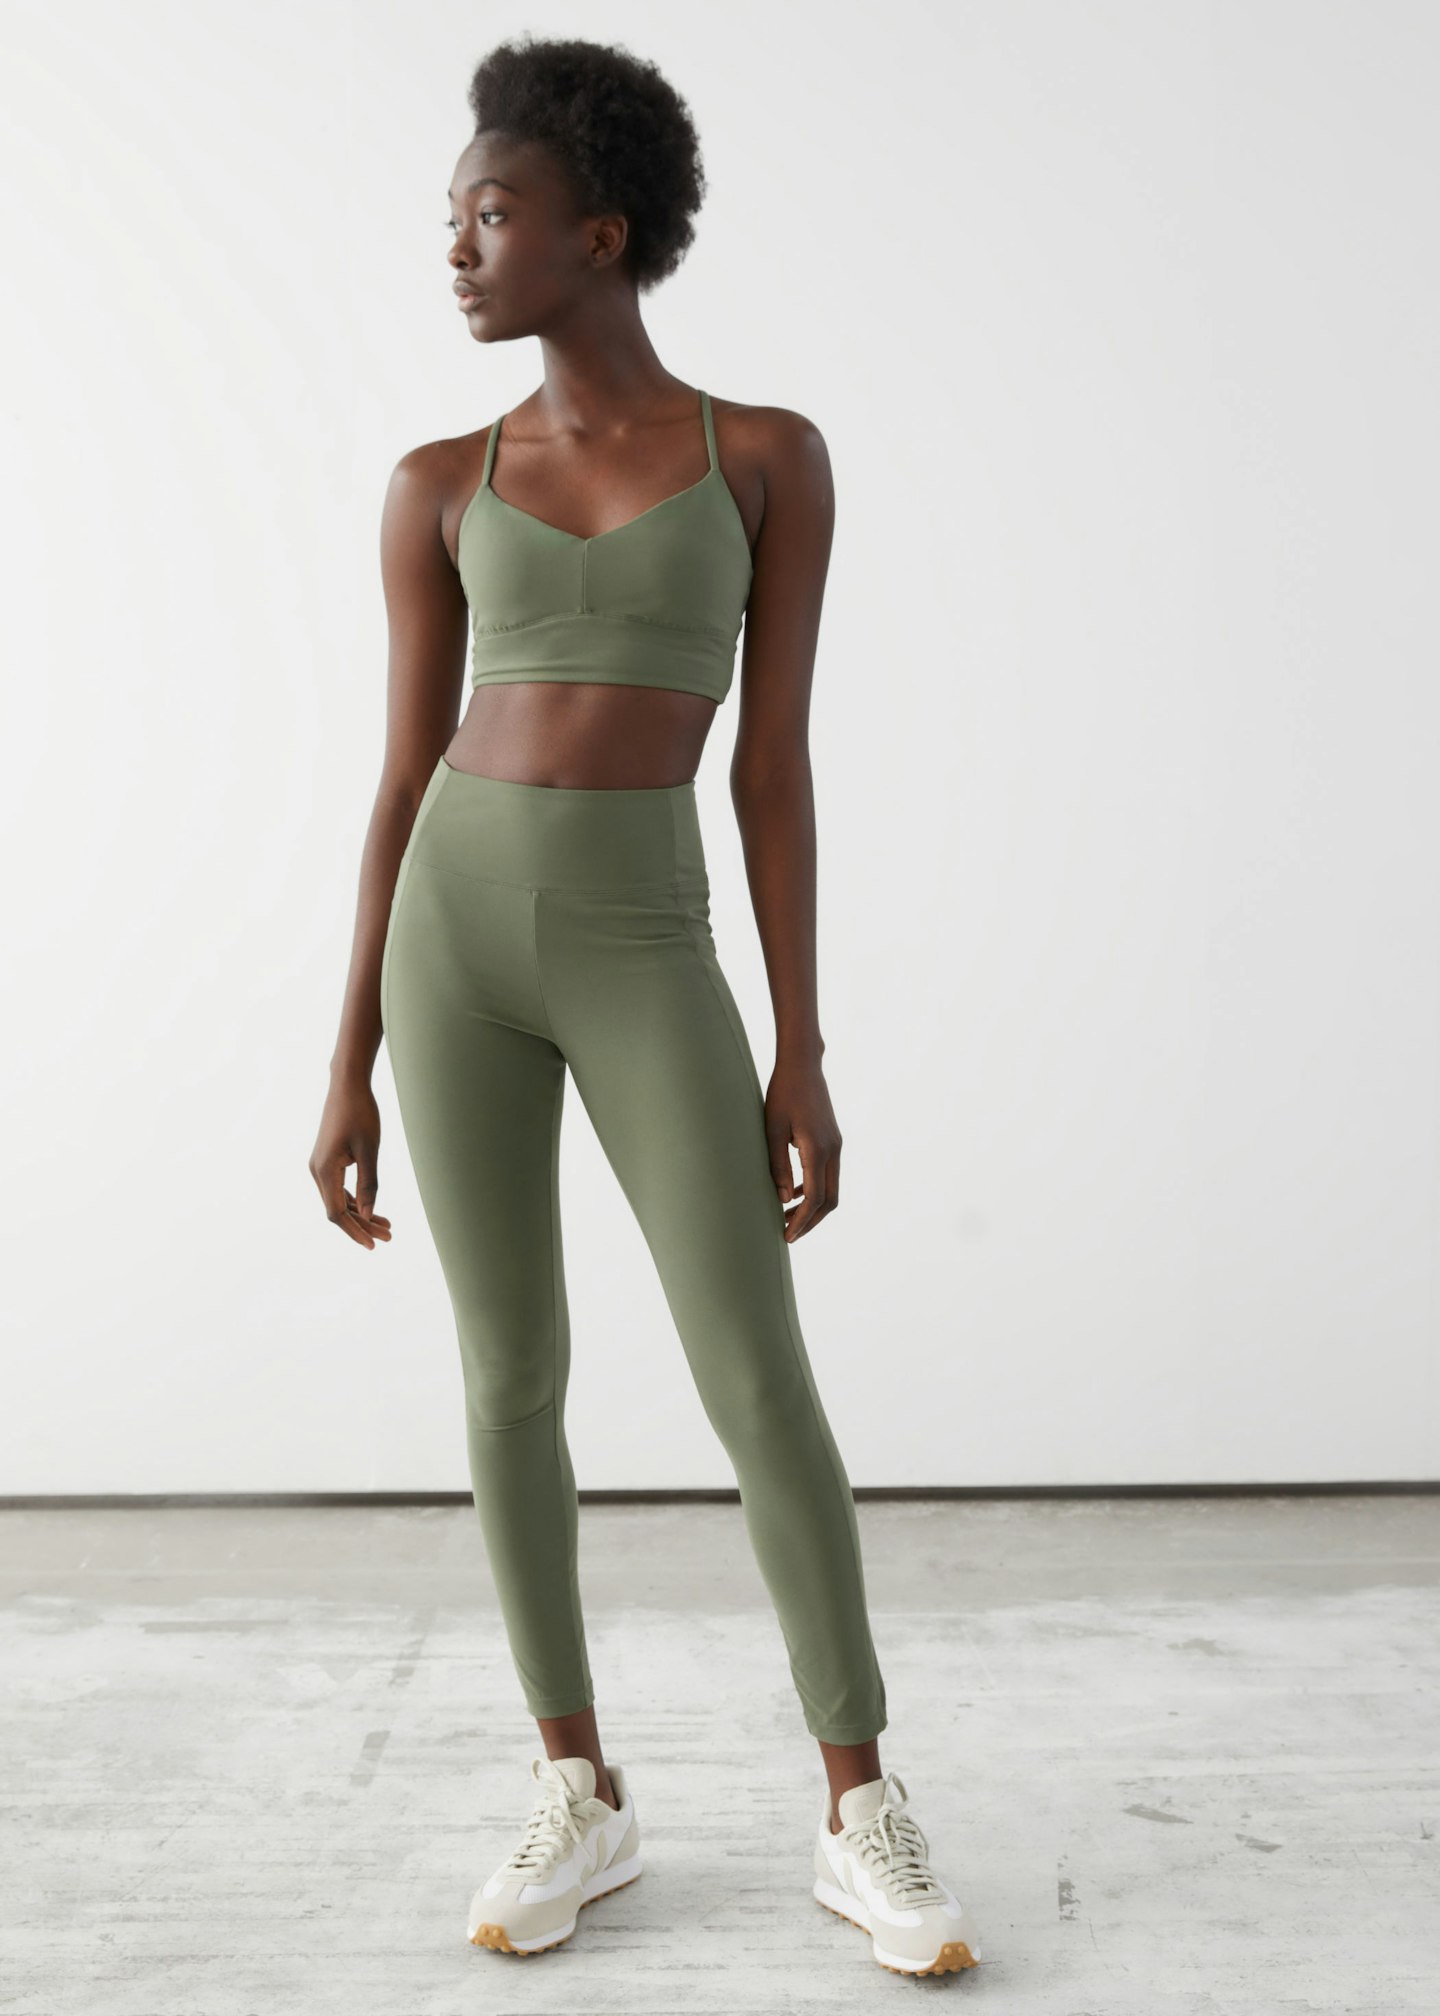 & Other Stories, Quick-Dry Yoga Tights, £45